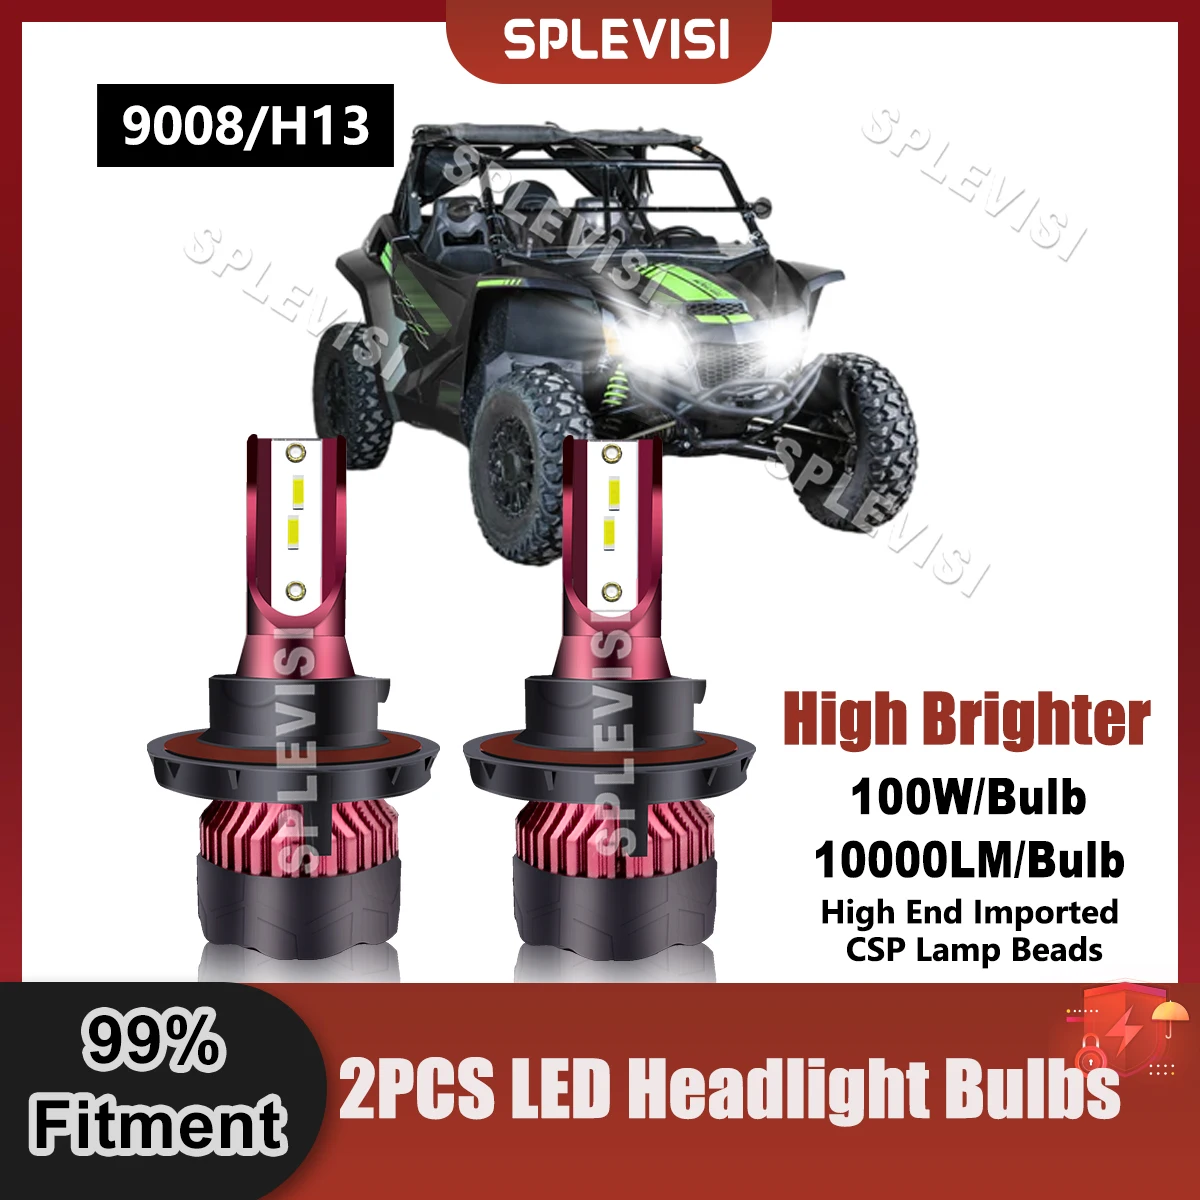 3x Brightness 9008/H13 Bulbs LED Headlamp High Low Beam Pure White For Arctic Cat Prowler 500 2017 2018 2019 2020 2021 2022 2x 70w white headlights for arctic cat zr 5000 2014 2017 zr 7000 2014 2019 zr 8000 led 2014 2022 xf 8000 14 2019 xf 9000 14 2018